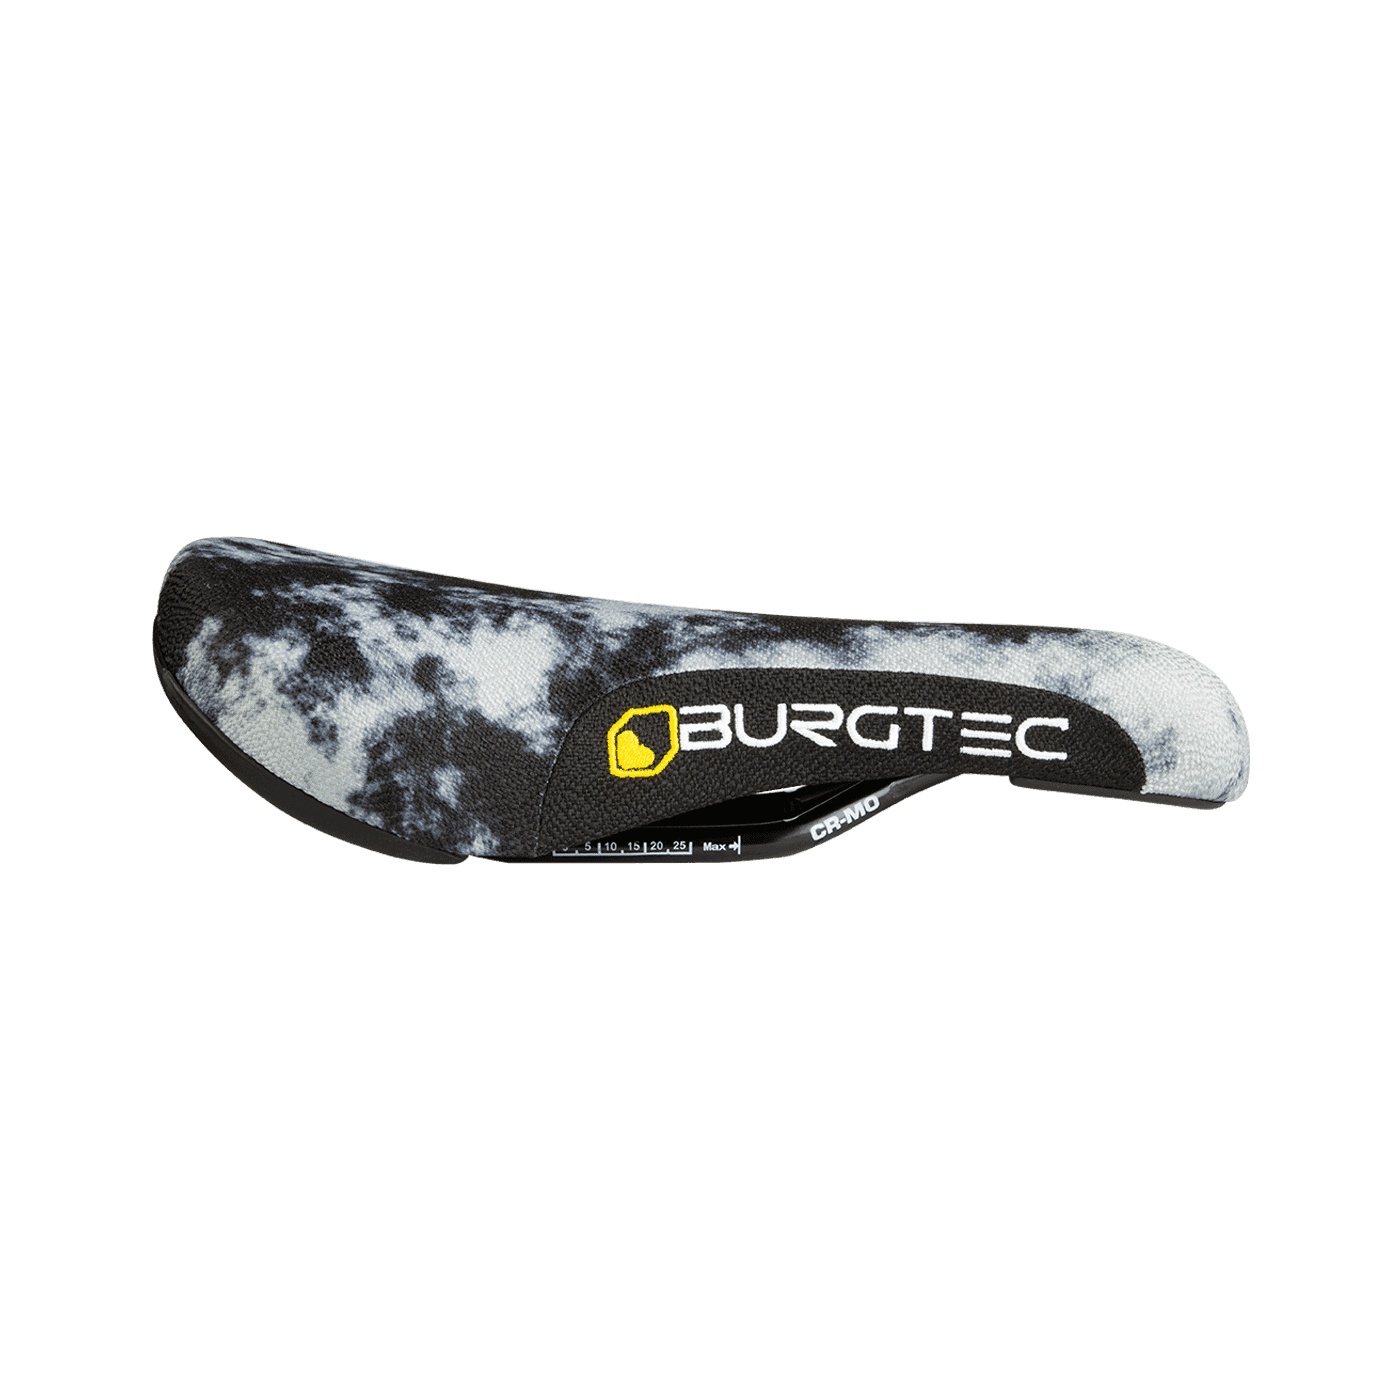 Burgtec the cloud boost saddle acid wash colour with white logo on the side